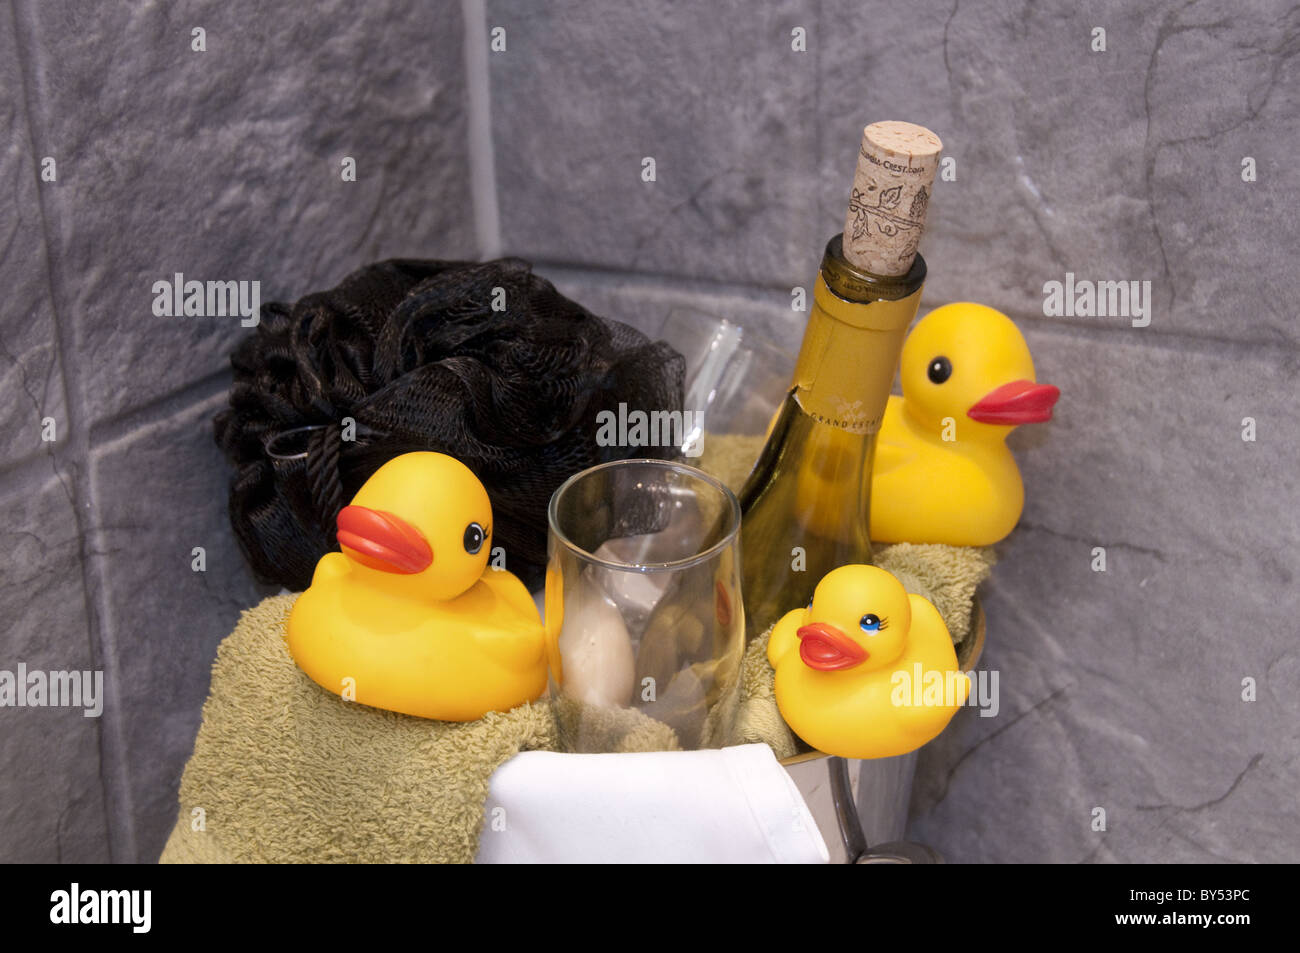 Rubber duckies and champagne bottle, glasses in bathroom Stock Photo